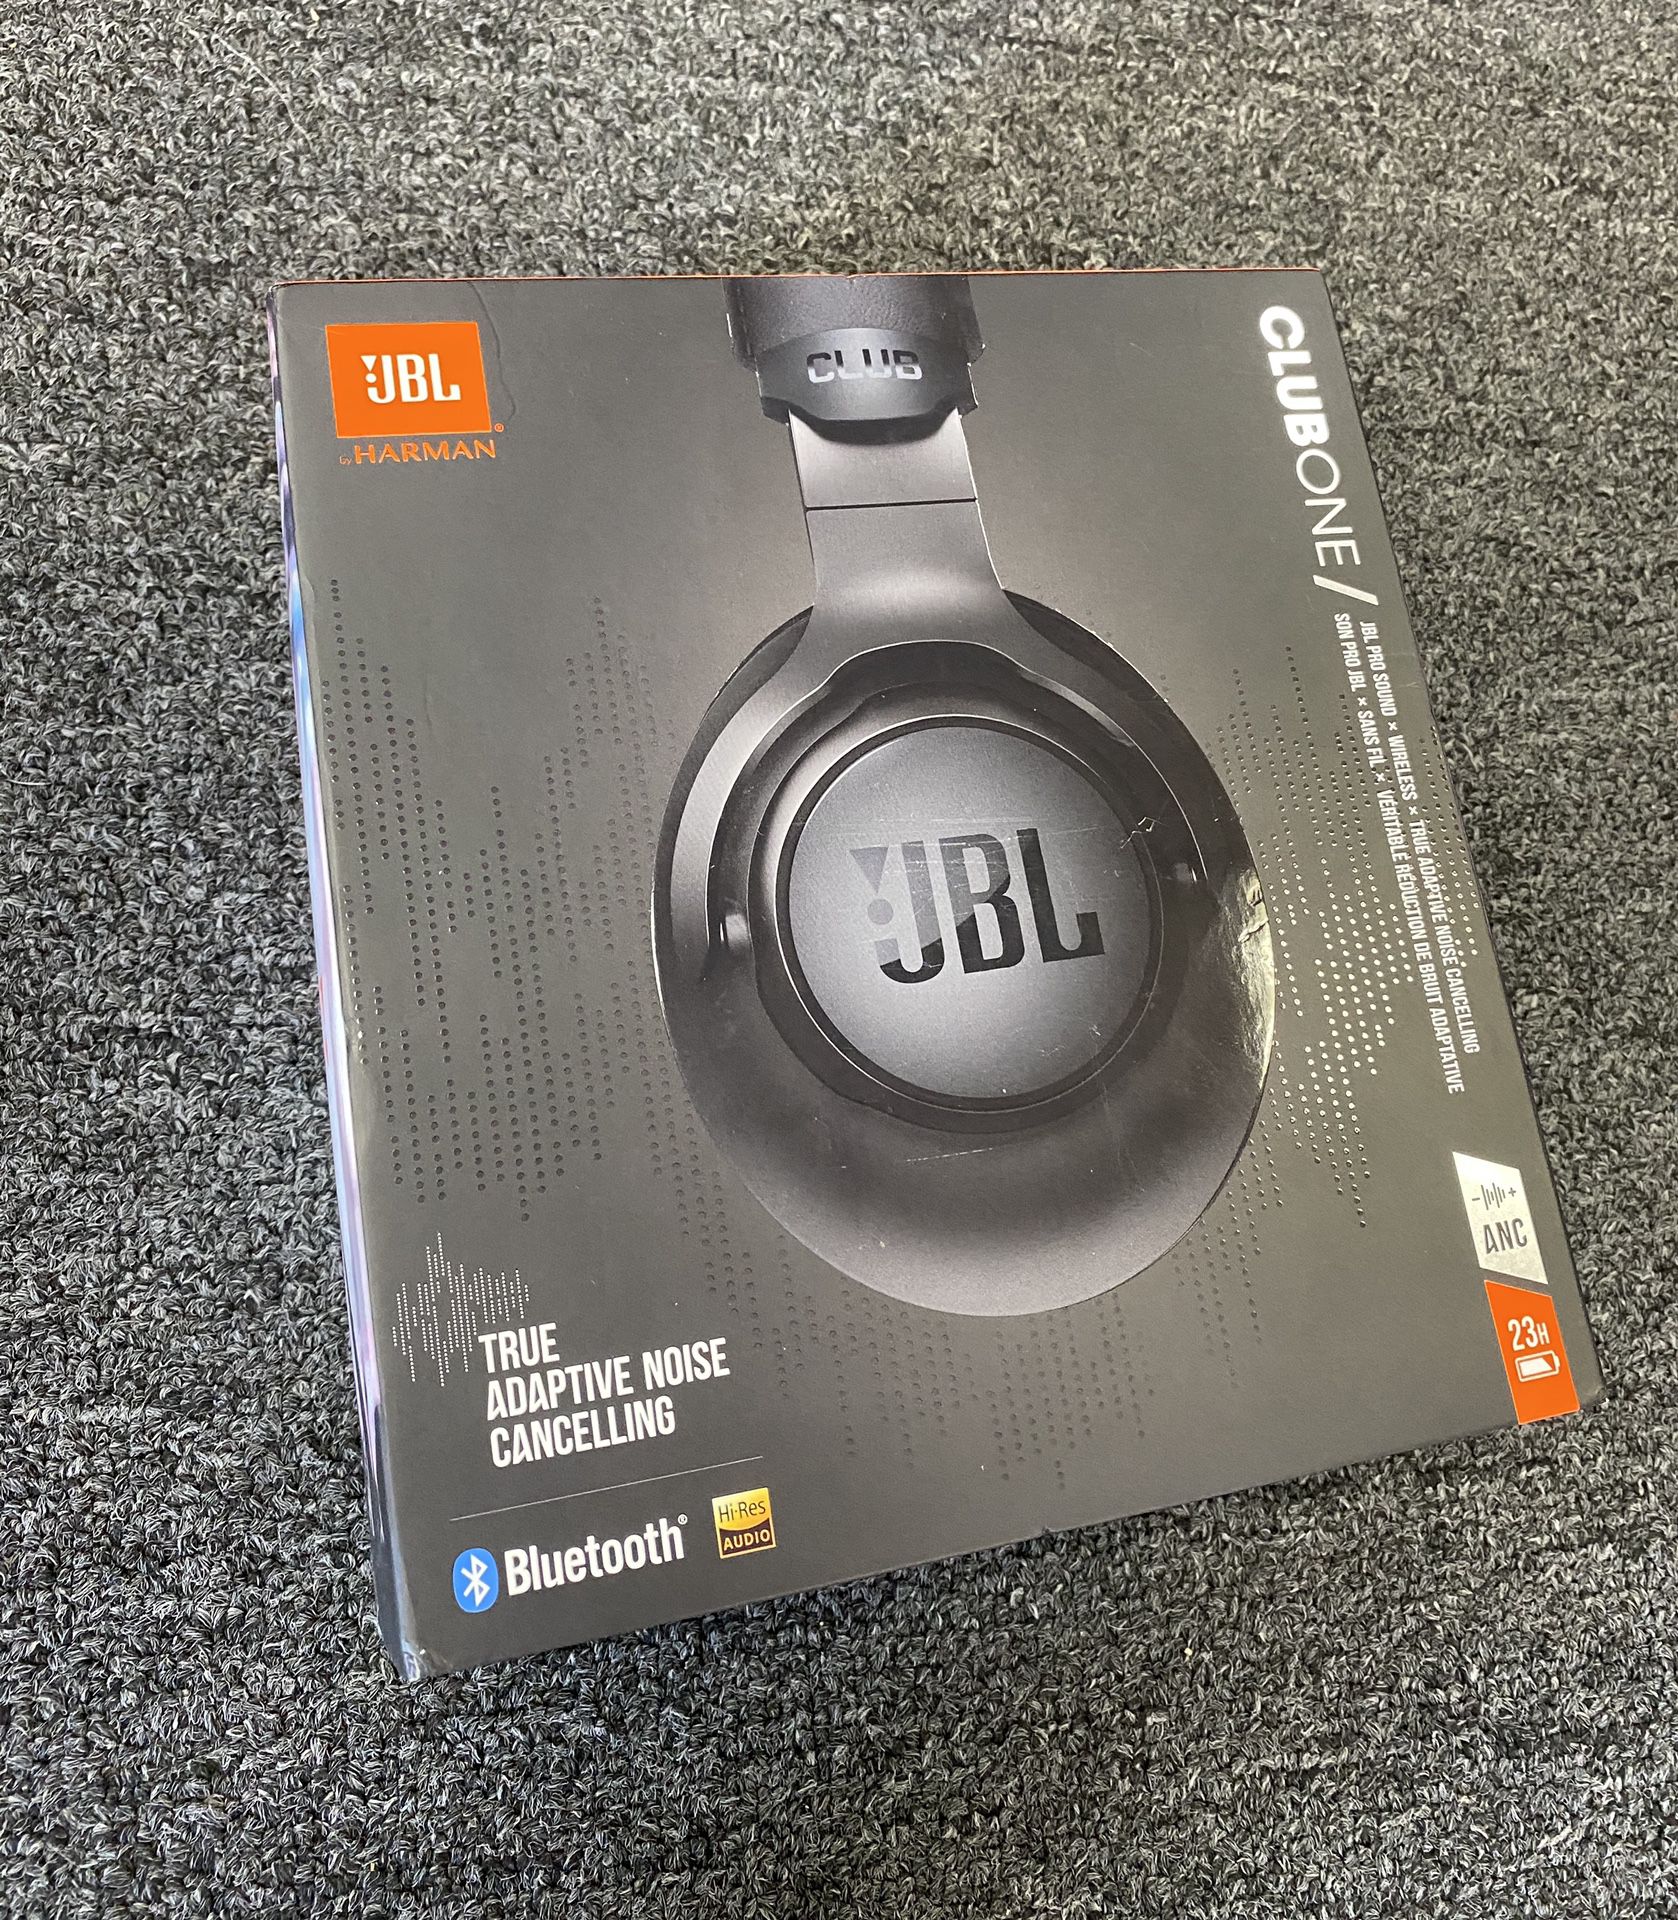 JBL - Club ONE Wireless Noise Cancelling Over-the-Ear Headphones - Black. Pick up only!!!